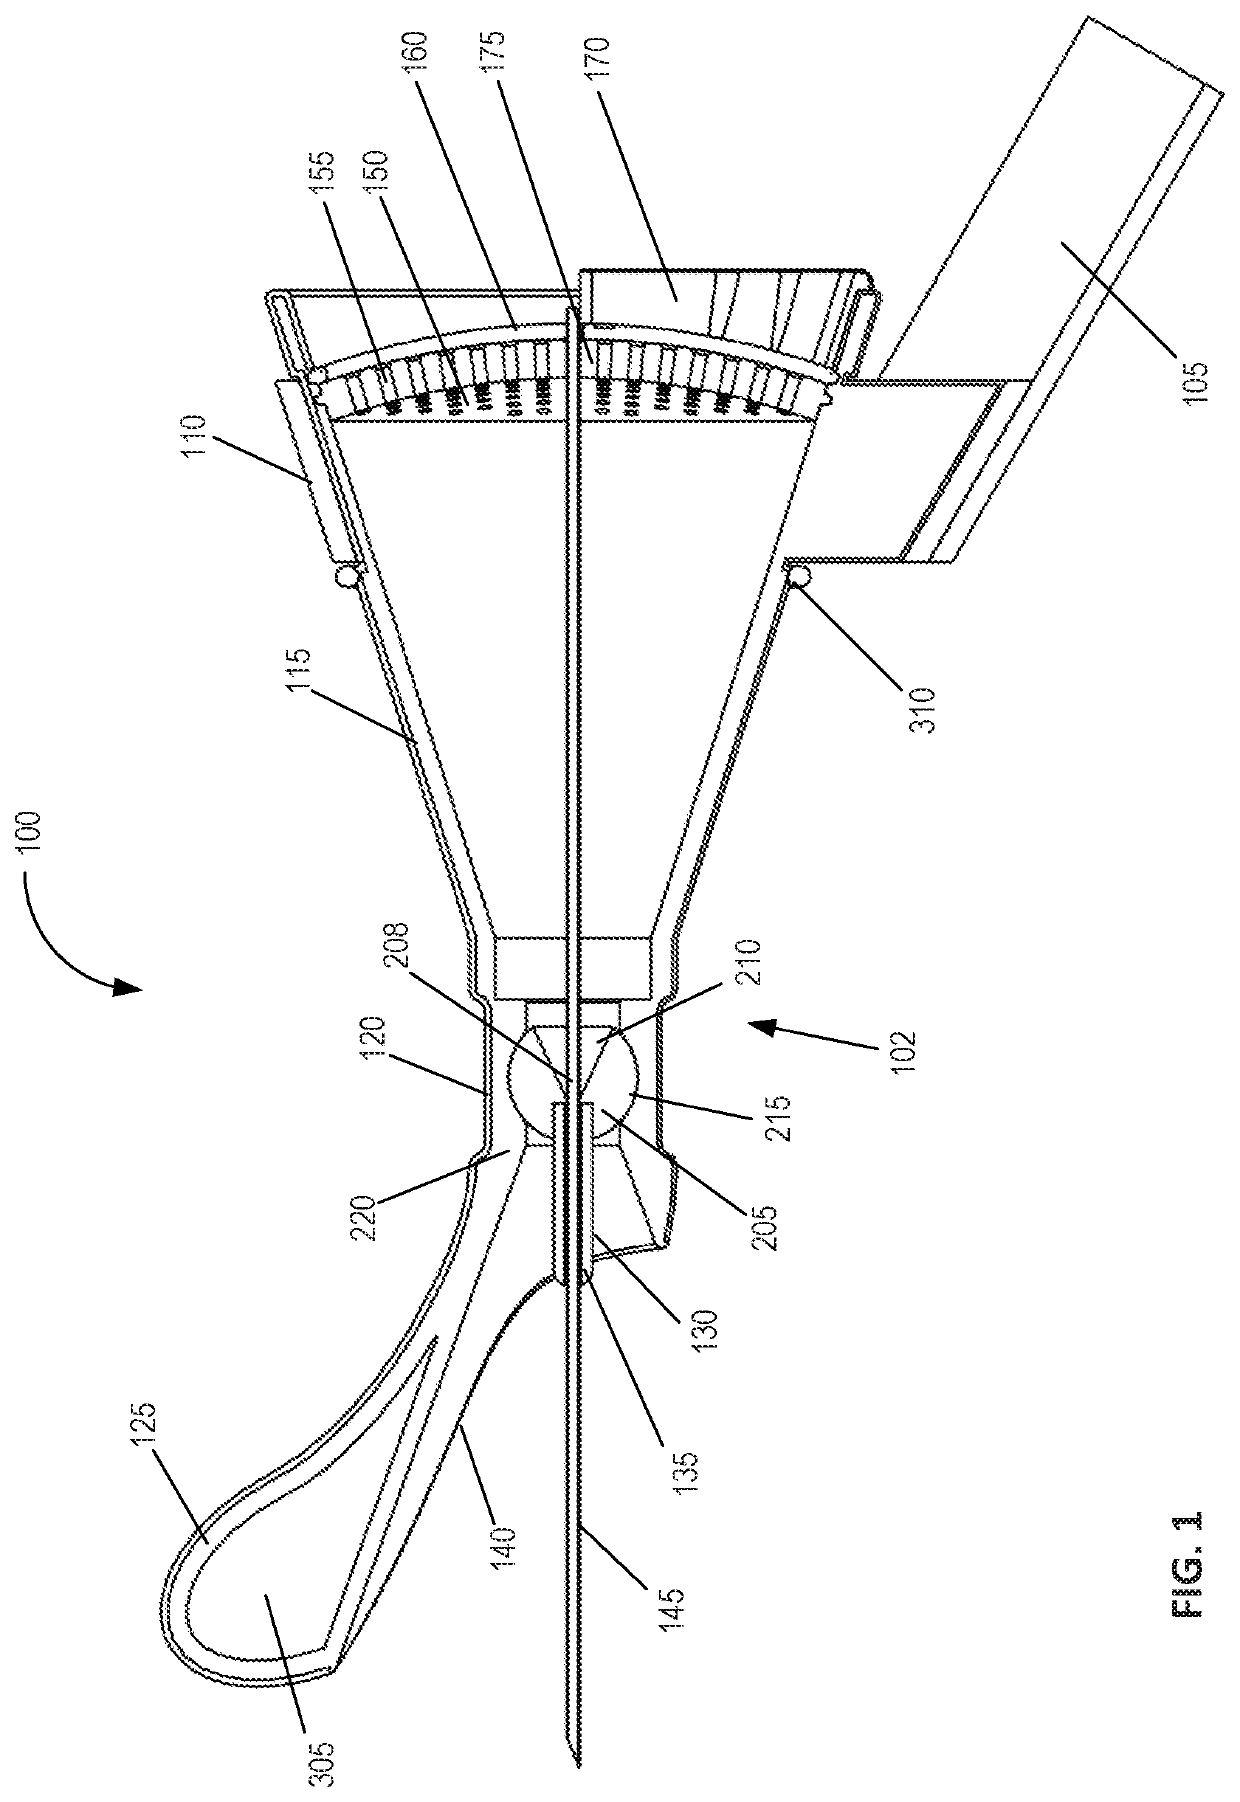 Device for anatomical sensing system-guided endorectal prostate biopsy